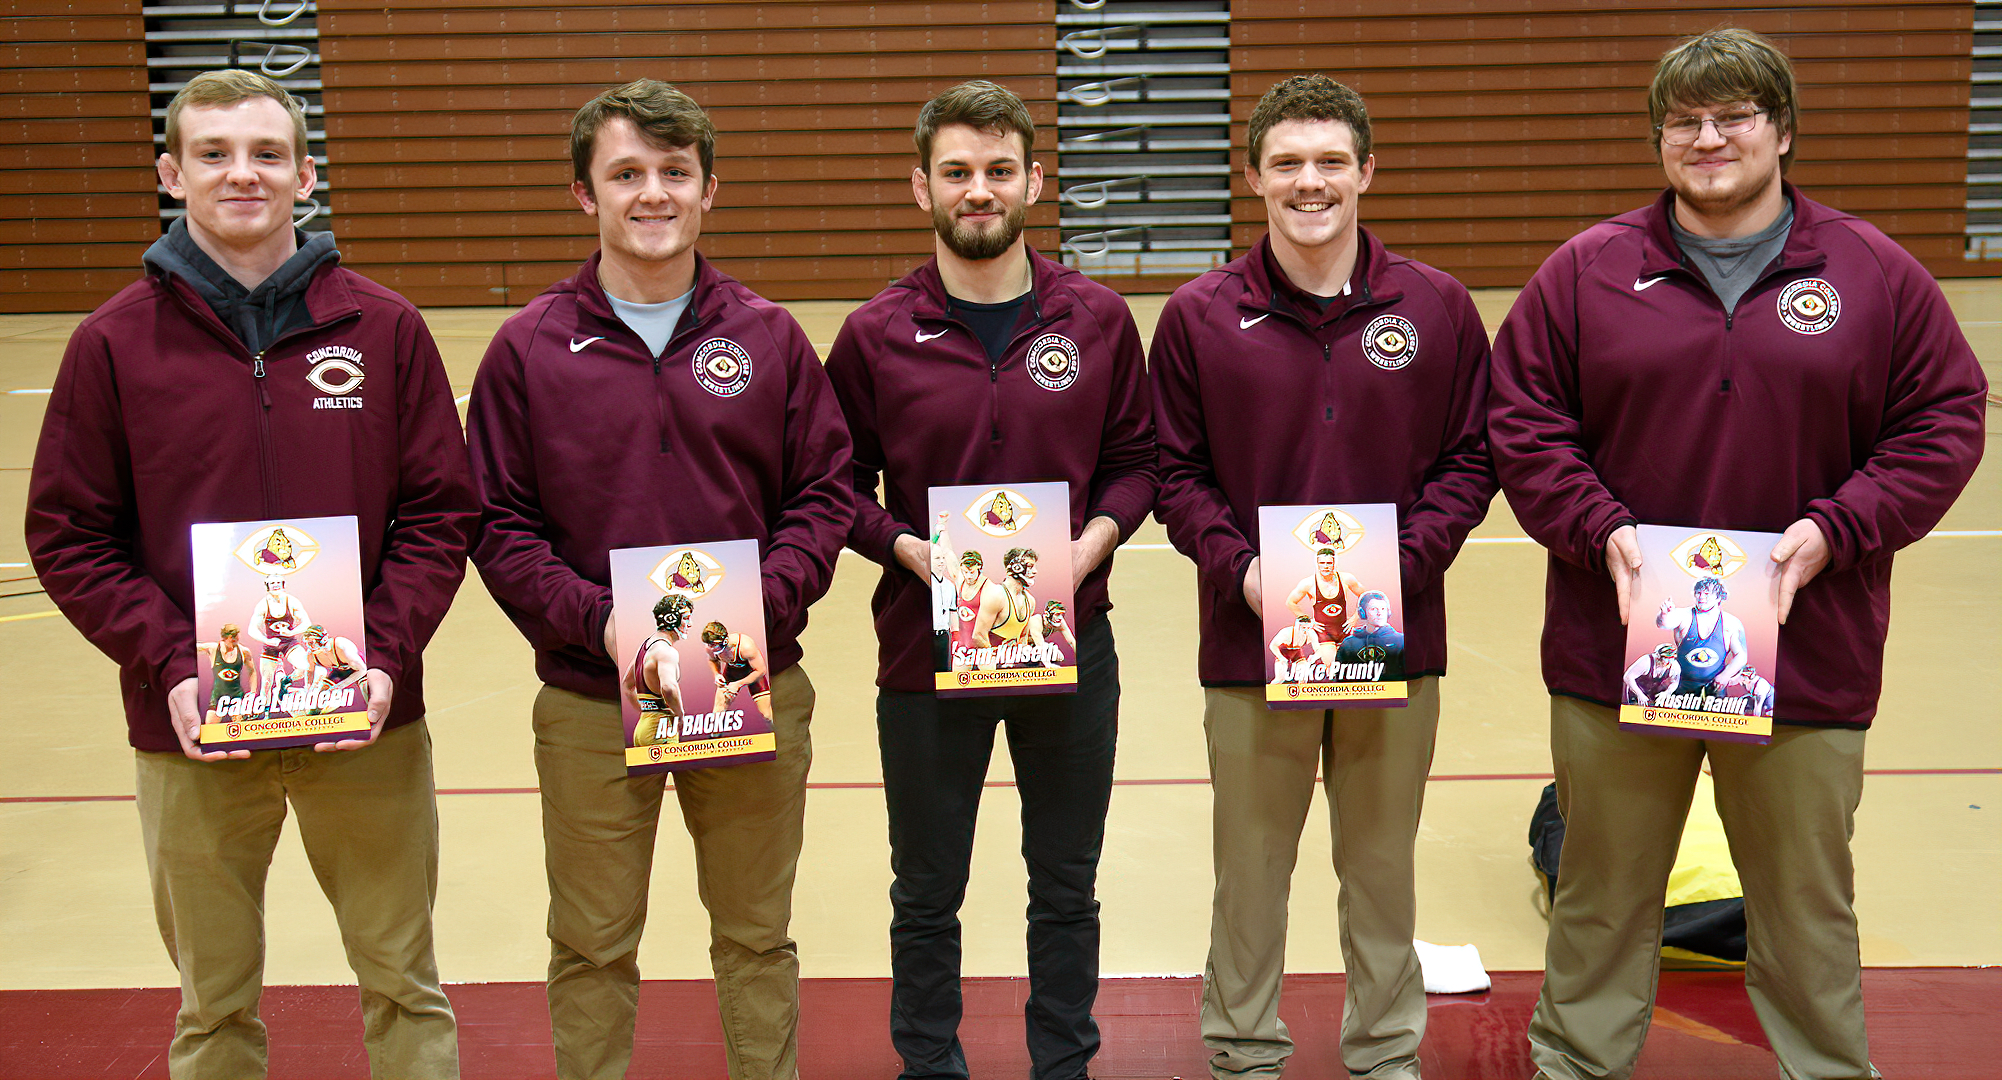 Seniors Cade Lundeen, AJ Backes, Sam Kulseth, Jacob Prunty and Austin Ratliff were all honored before the Cobbers' exhibition.